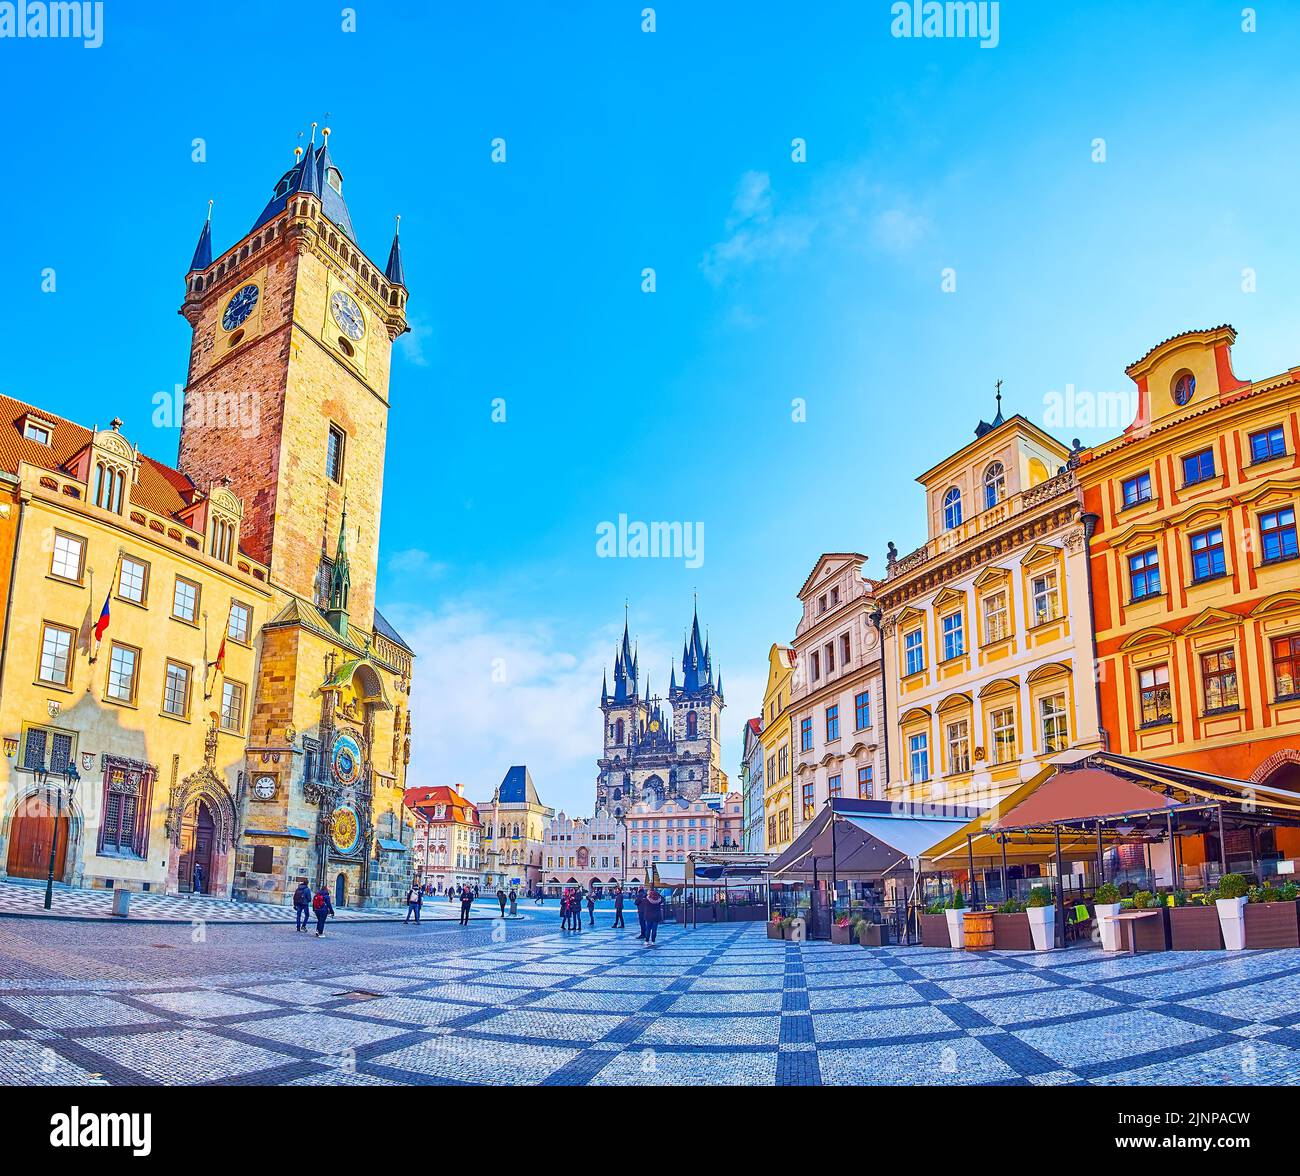 PRAGUE, CZECH REPUBLIC - MARCH 6, 2022: The medieval stone Old Town Square with Old Town Hall, Prague Orloj astronomical clock, townhouses and Tynsky Stock Photo